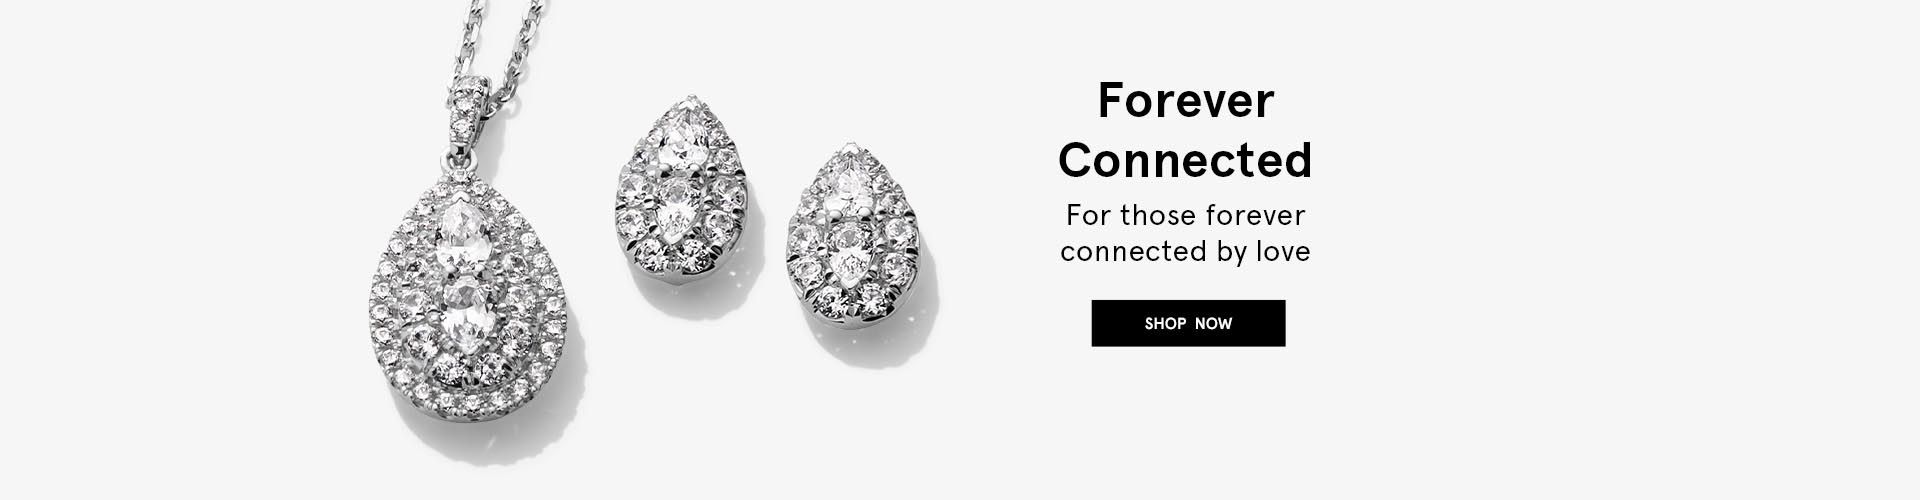 Shop The Forever Connected Collection